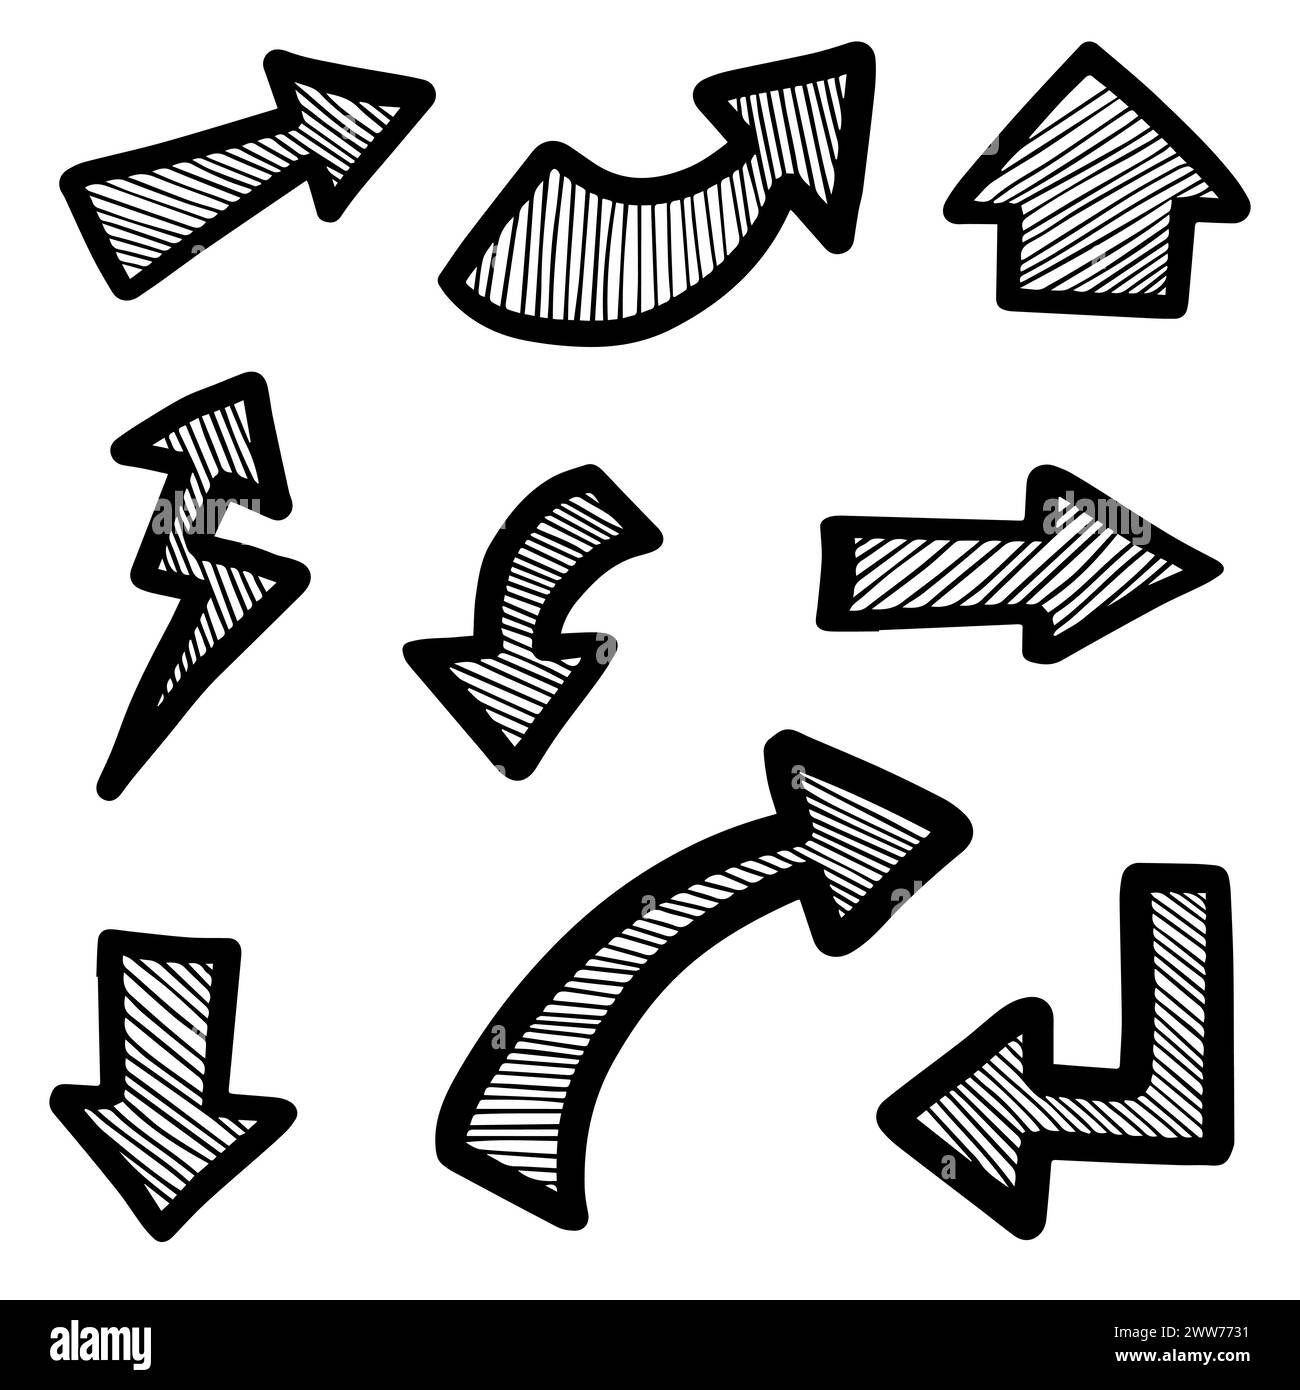 Doodle arrows are hand drawn with lots of collectibles inside Stock Vector